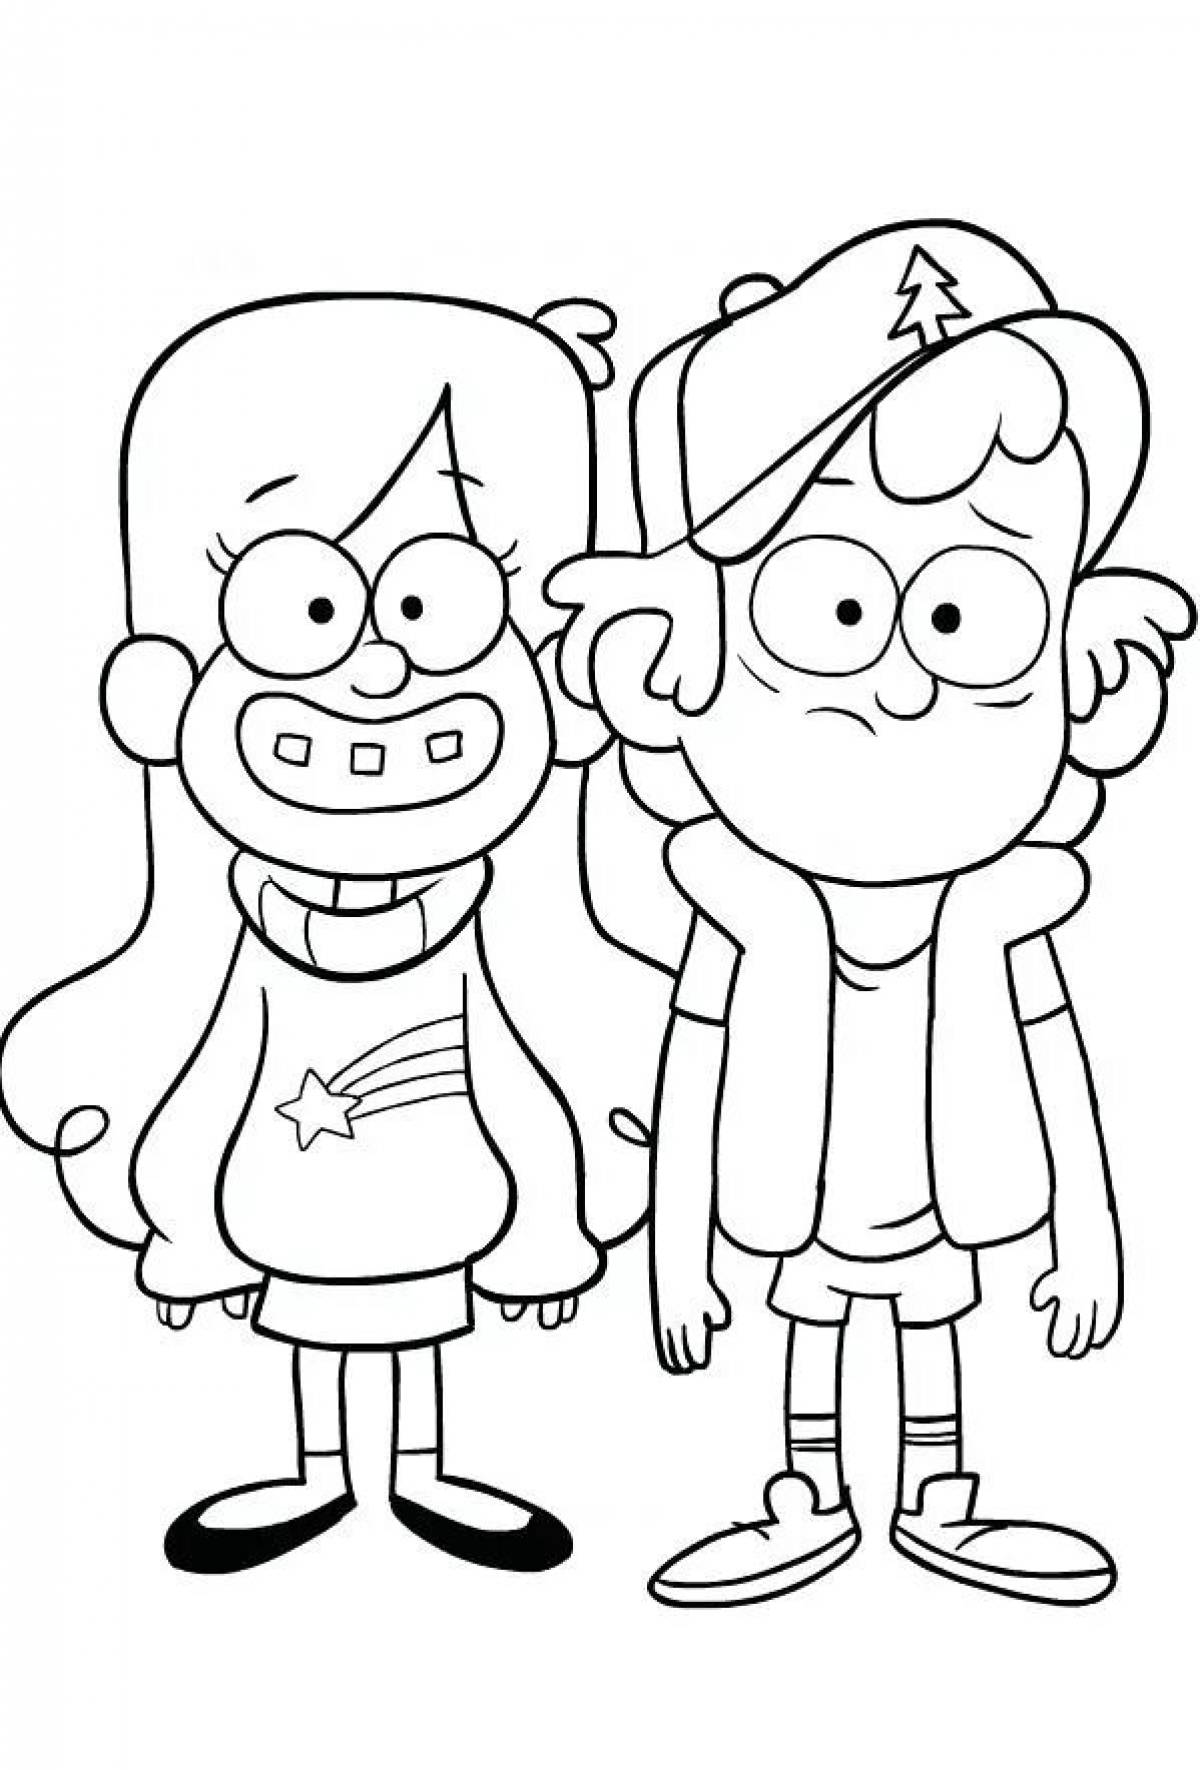 Dipper and Mabel coloring page filled with colors